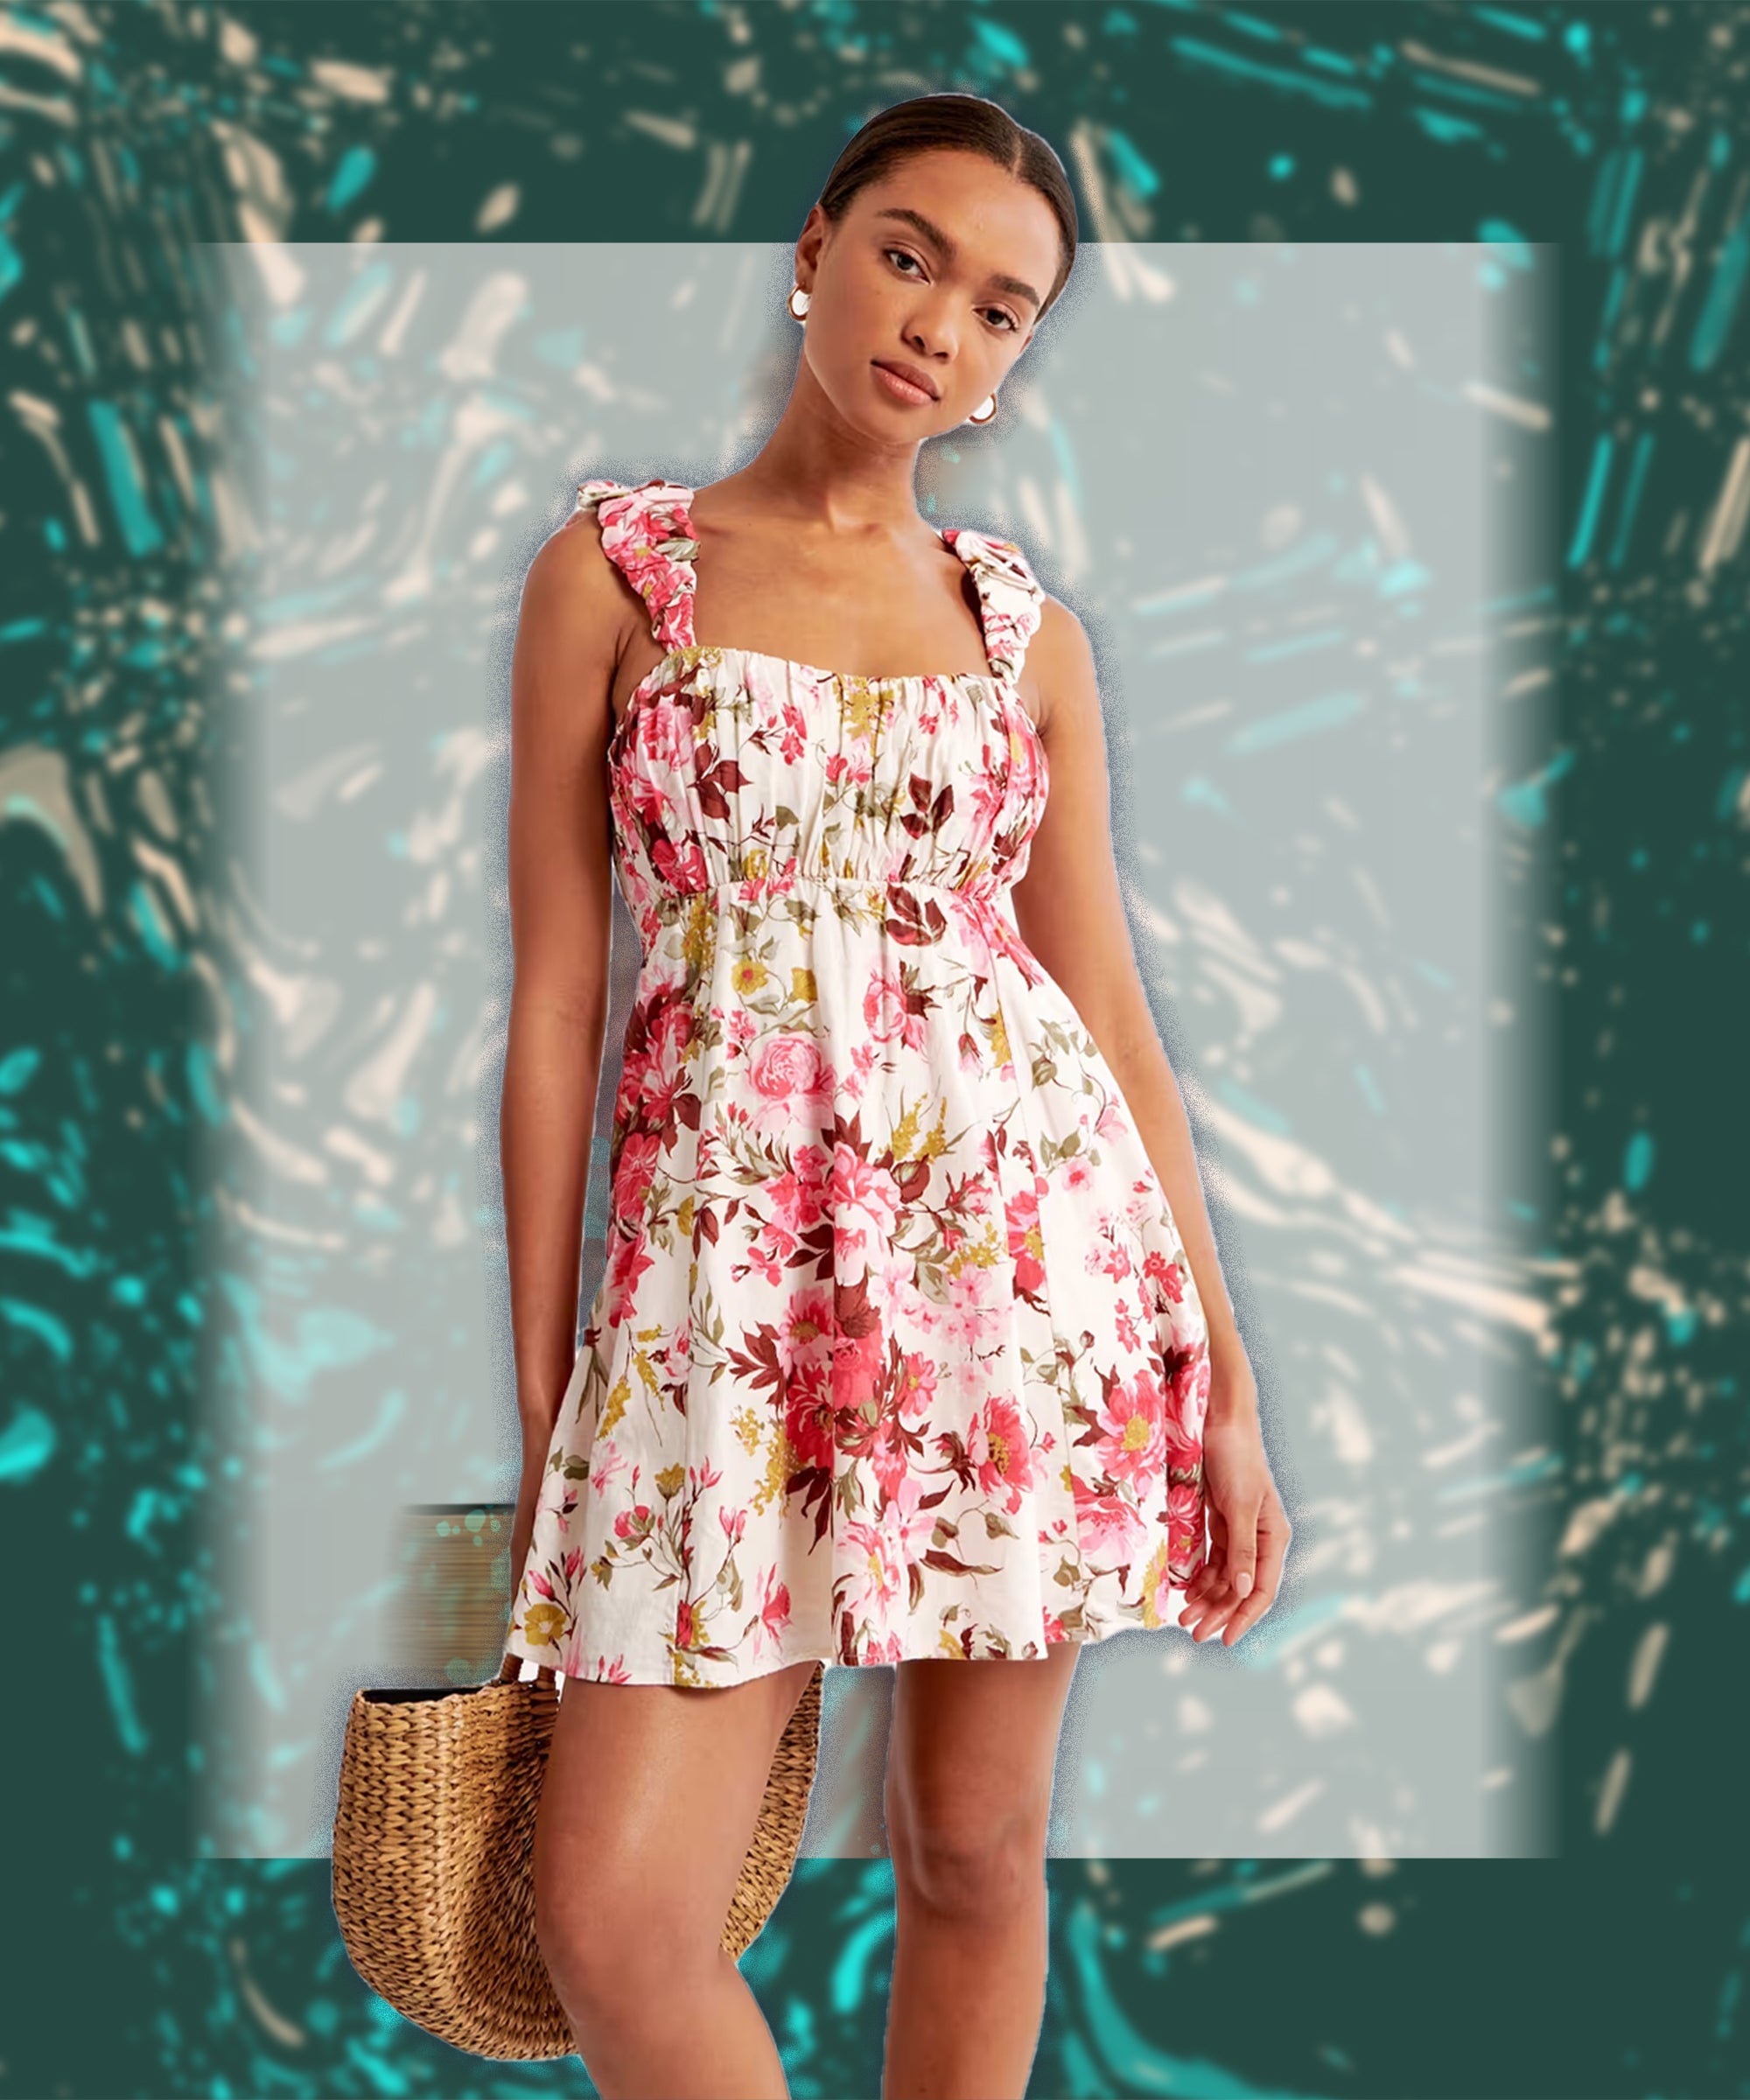 Relaxed and Romantic Floral Summer Dresses  Floral dress summer, Fashion, Pretty  dresses